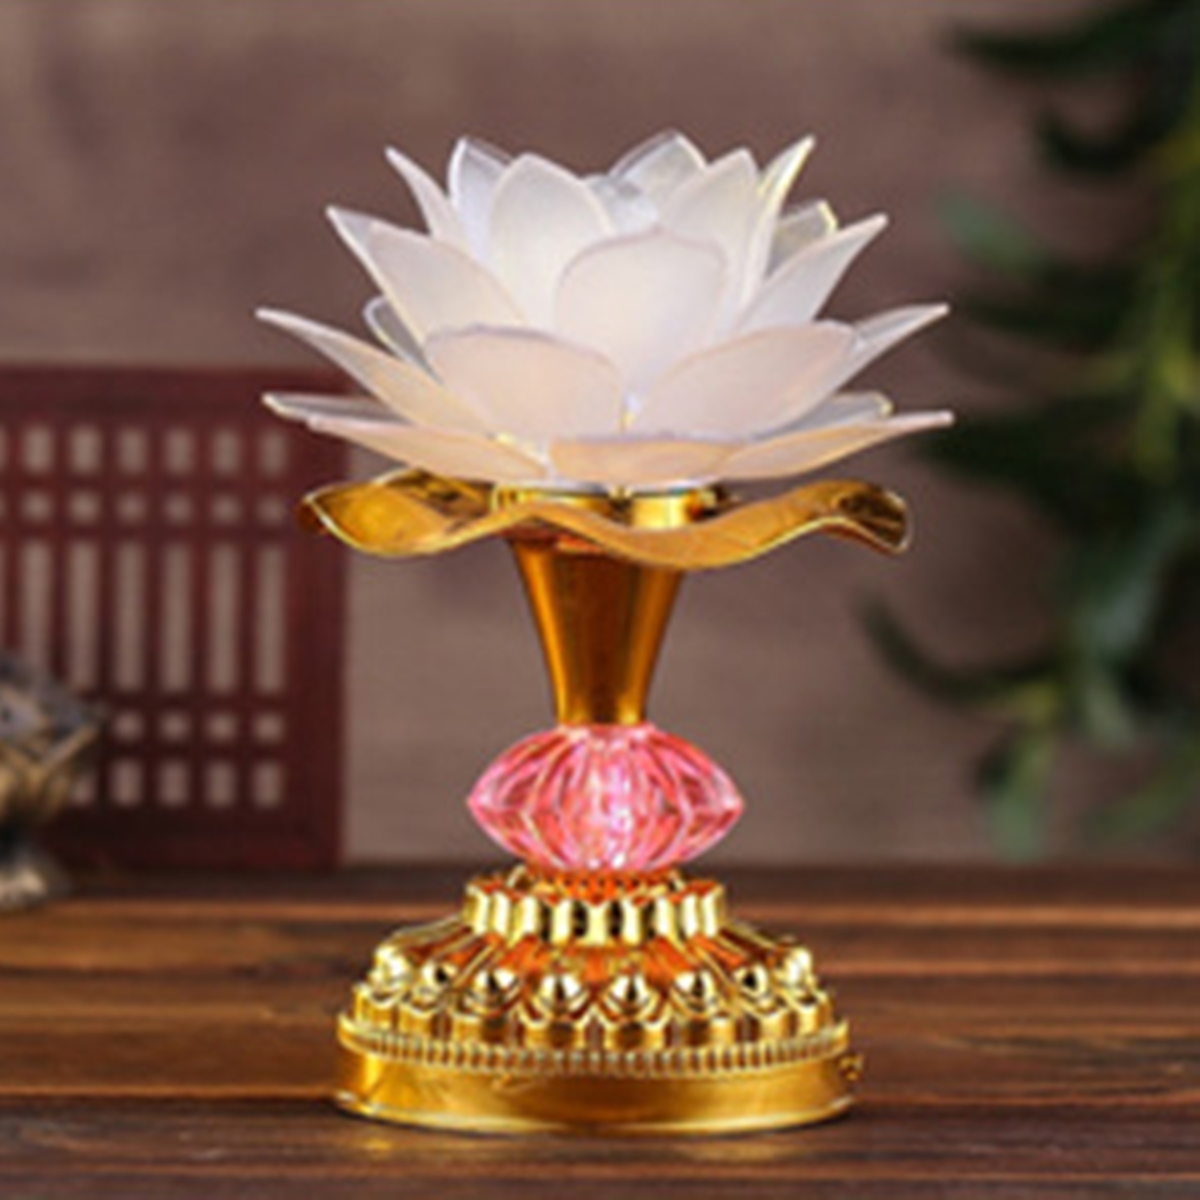 53-Buddhism-Song-7-Color-Changing-Lotus-LED-Night-Light-Music-Holiday-Lamp-Decoration-1683172-4